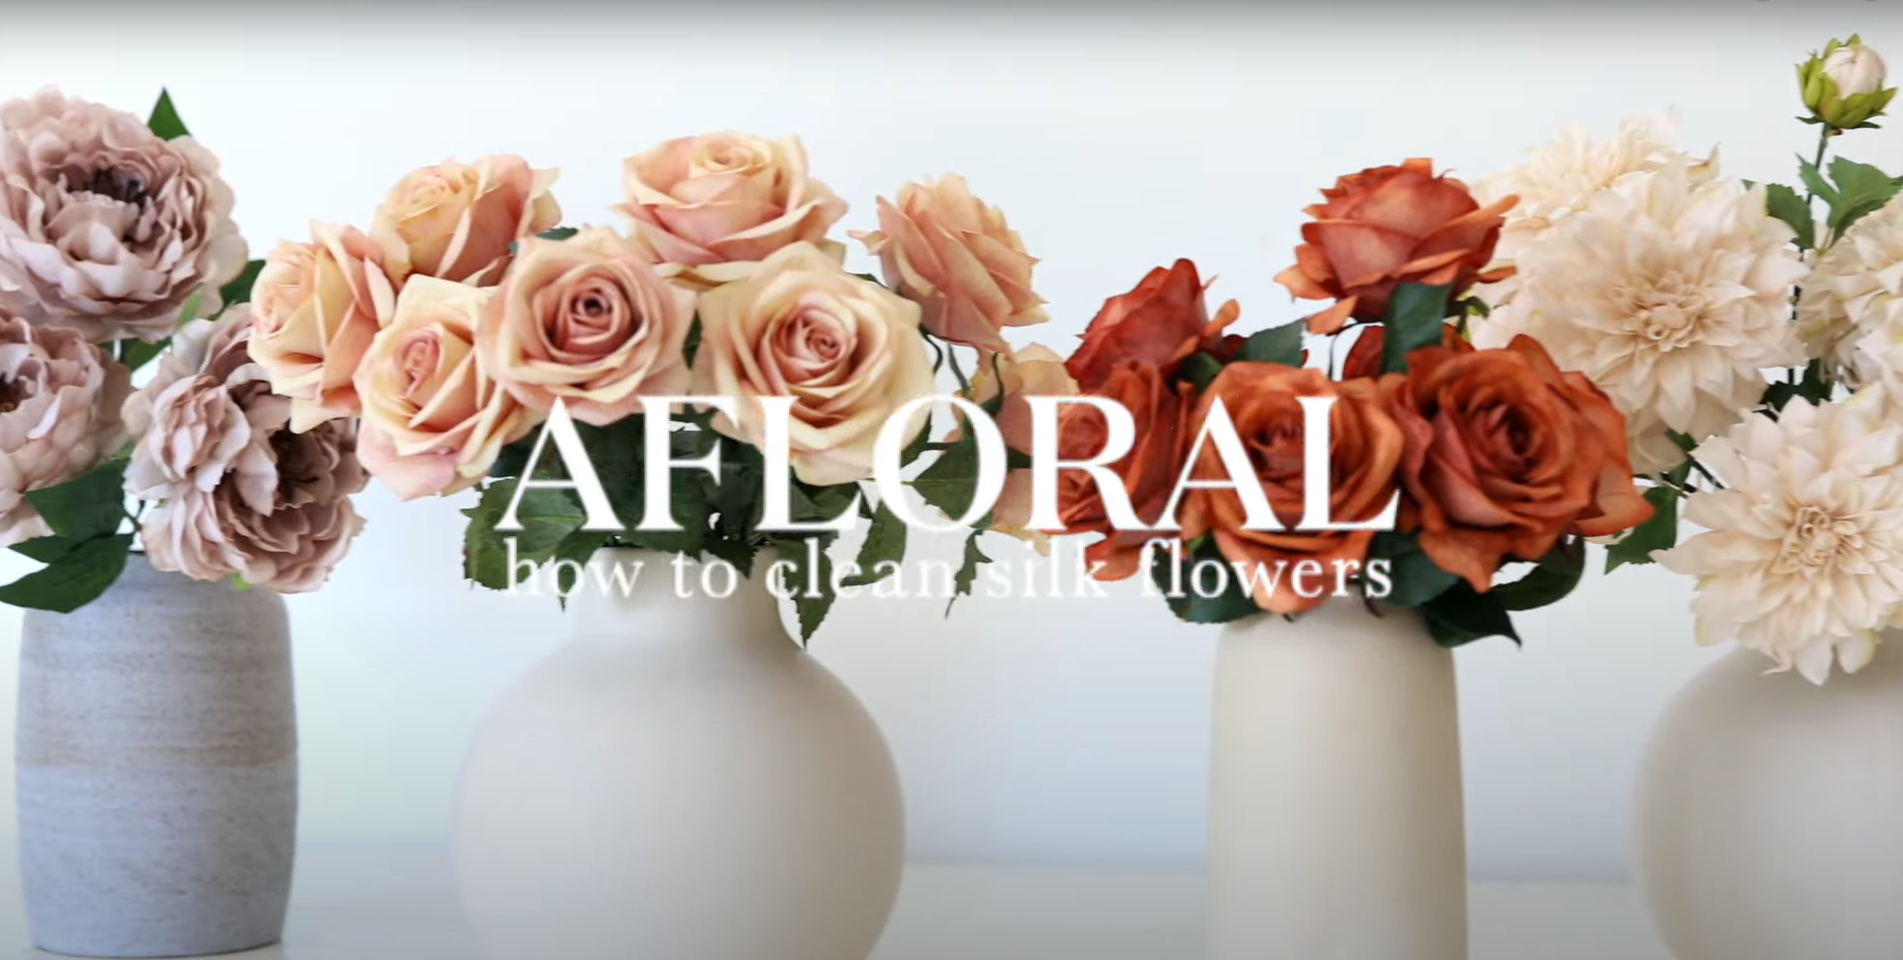 Load video: Watch how to clean silk flowers. | Afloral